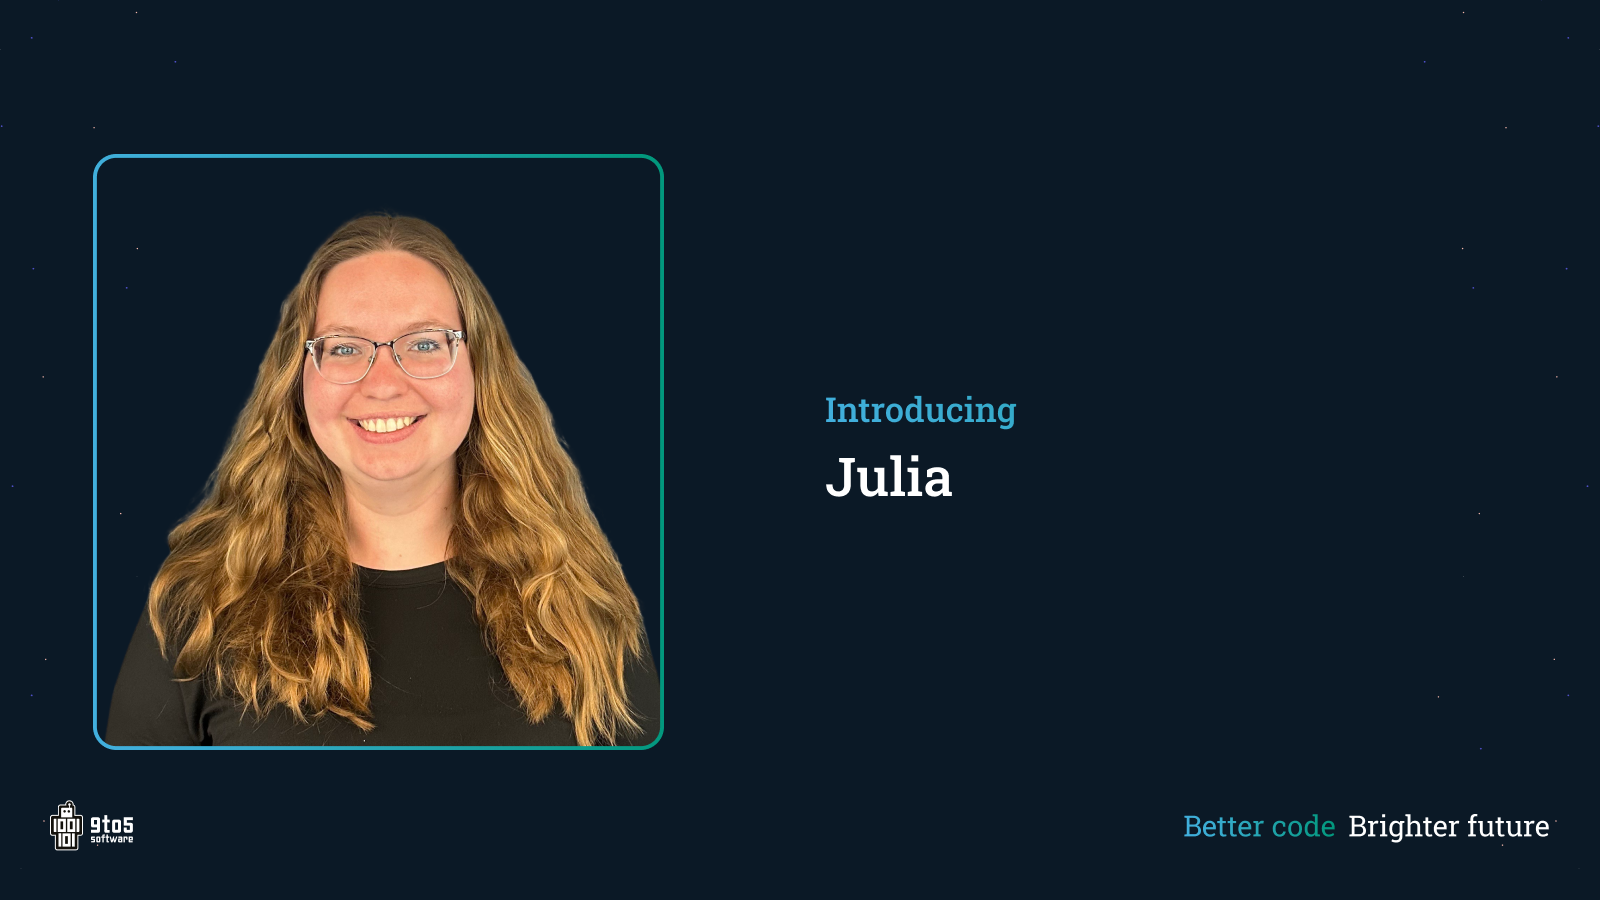 Introducing... Julia - A new employee at 9to5 software